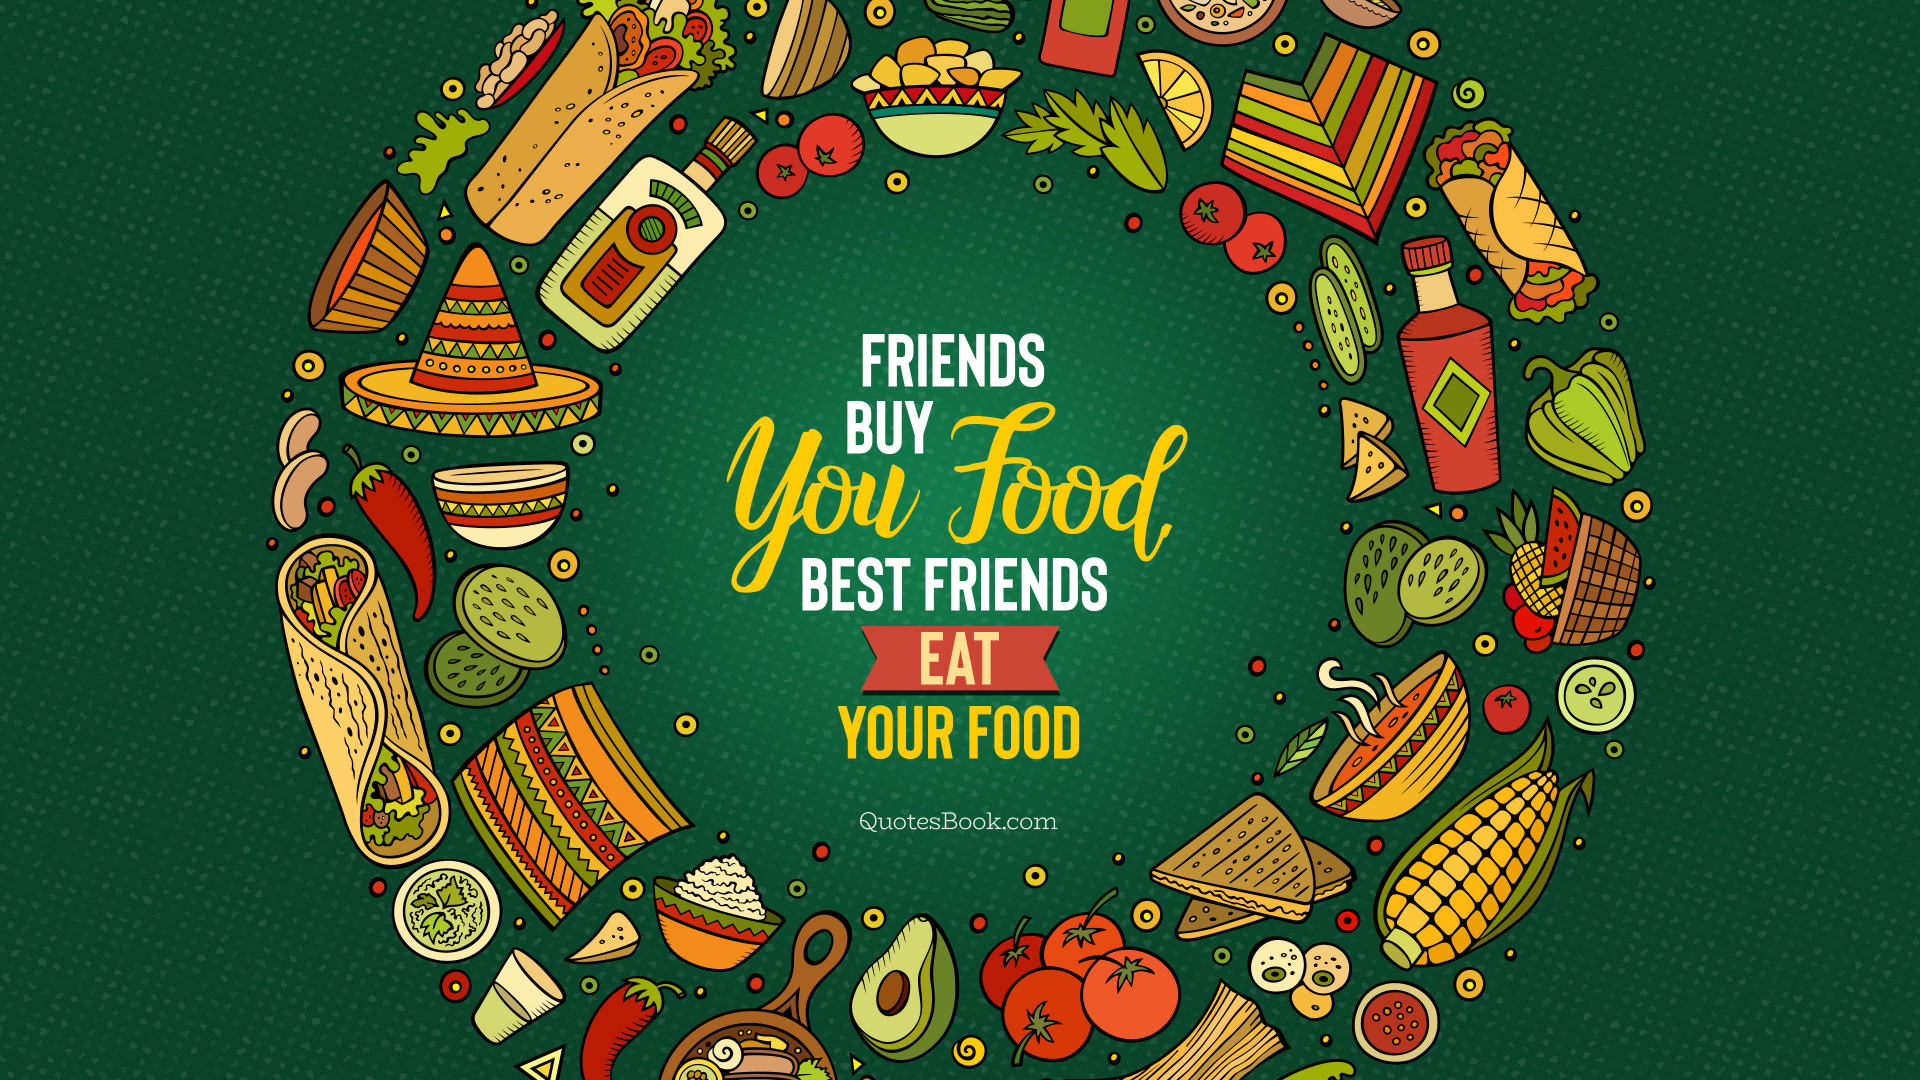 My friend food. Food quotes. Quotes about food. Eat good food Постер. Quotes with food.